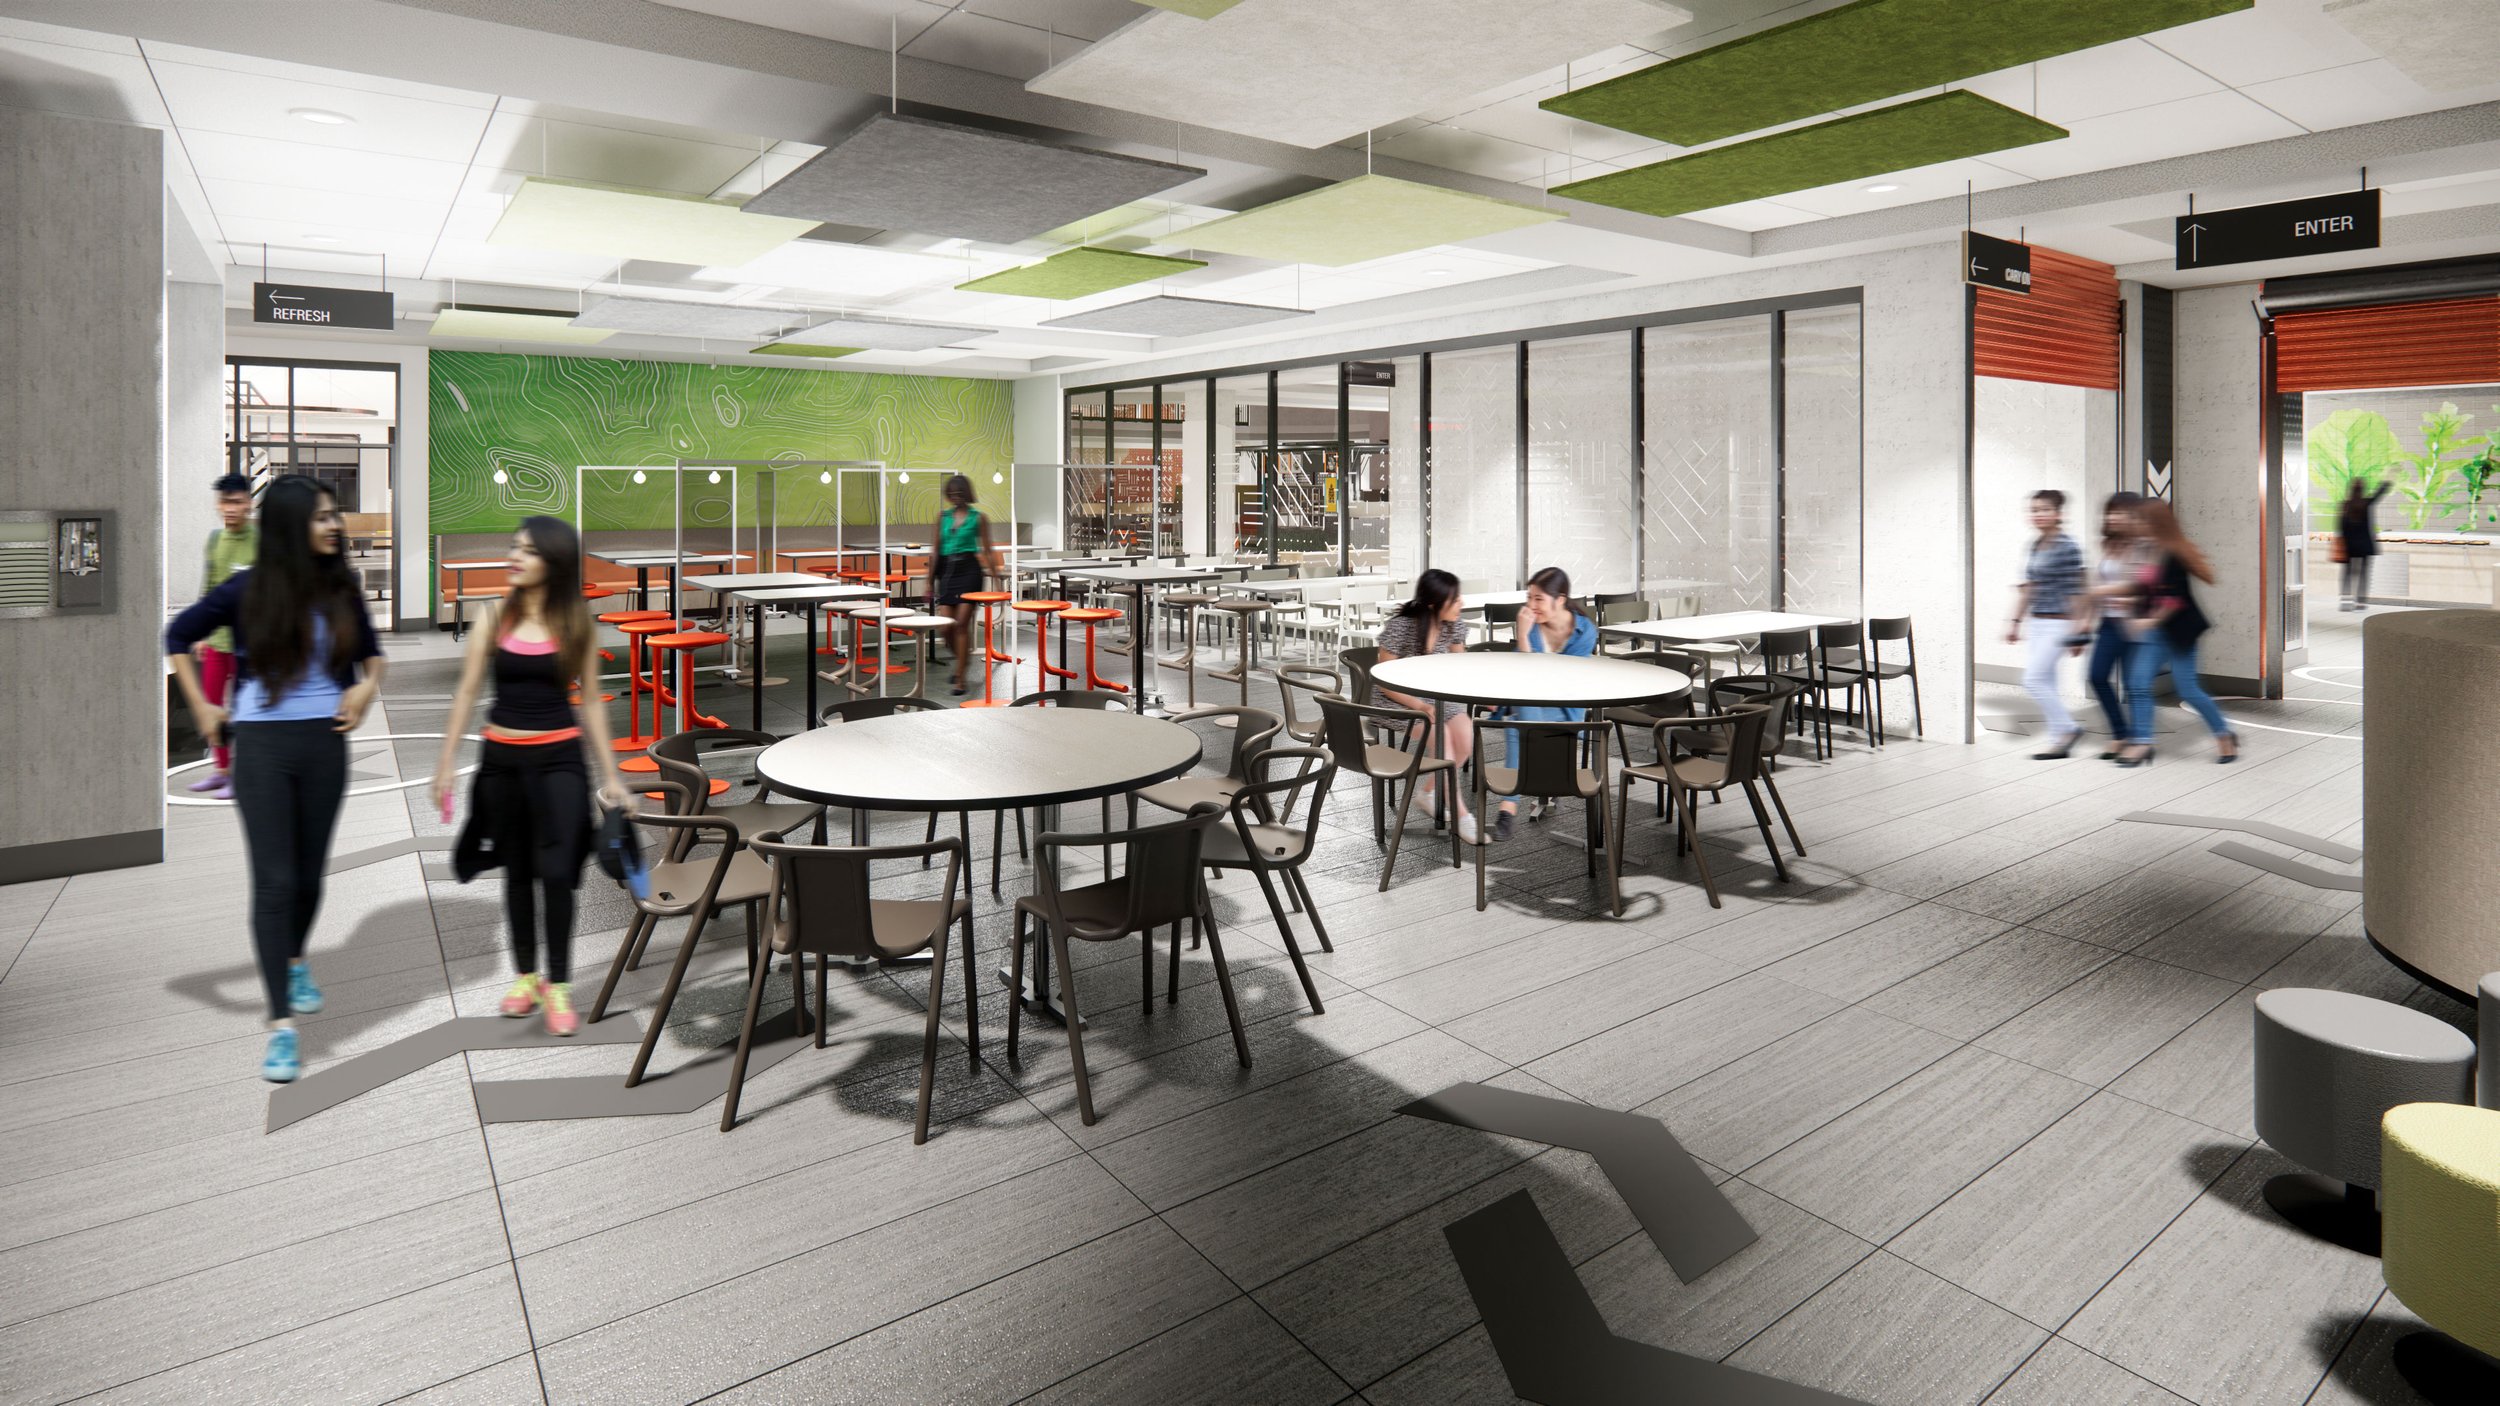 designing safer dining areas in schools